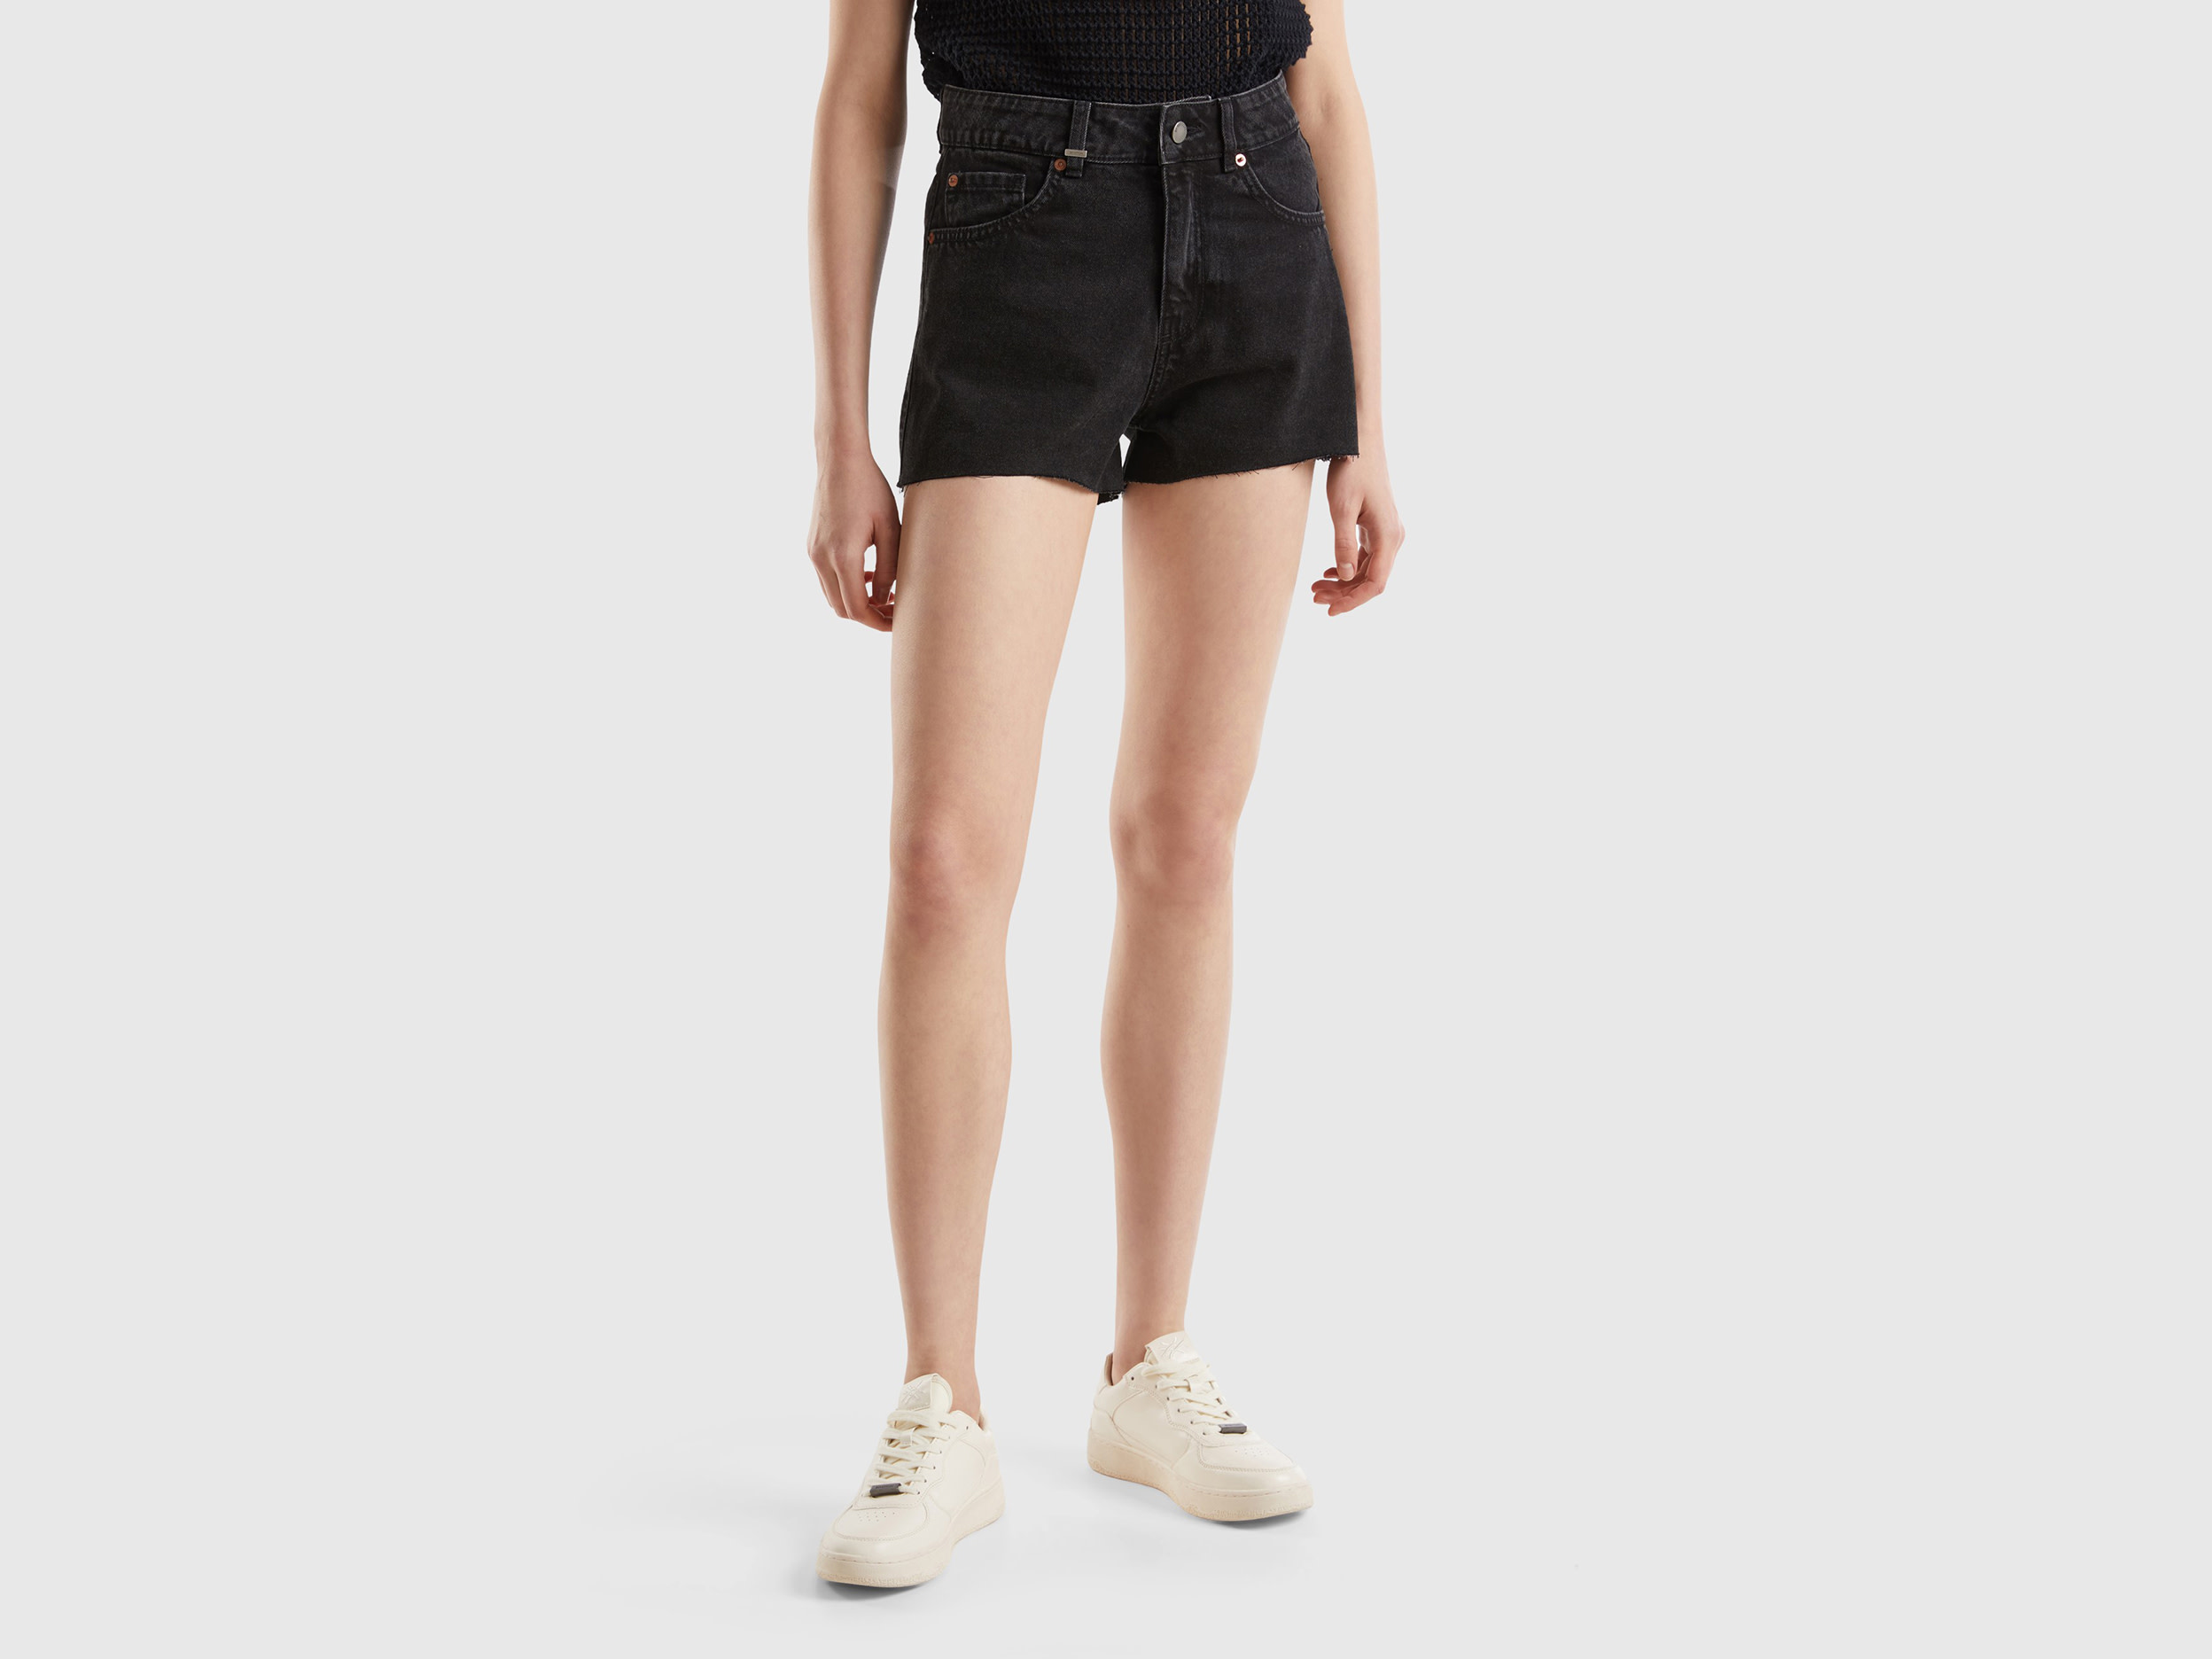 Image of Benetton, Frayed Shorts In Recycled Cotton Blend, size 31, Black, Women